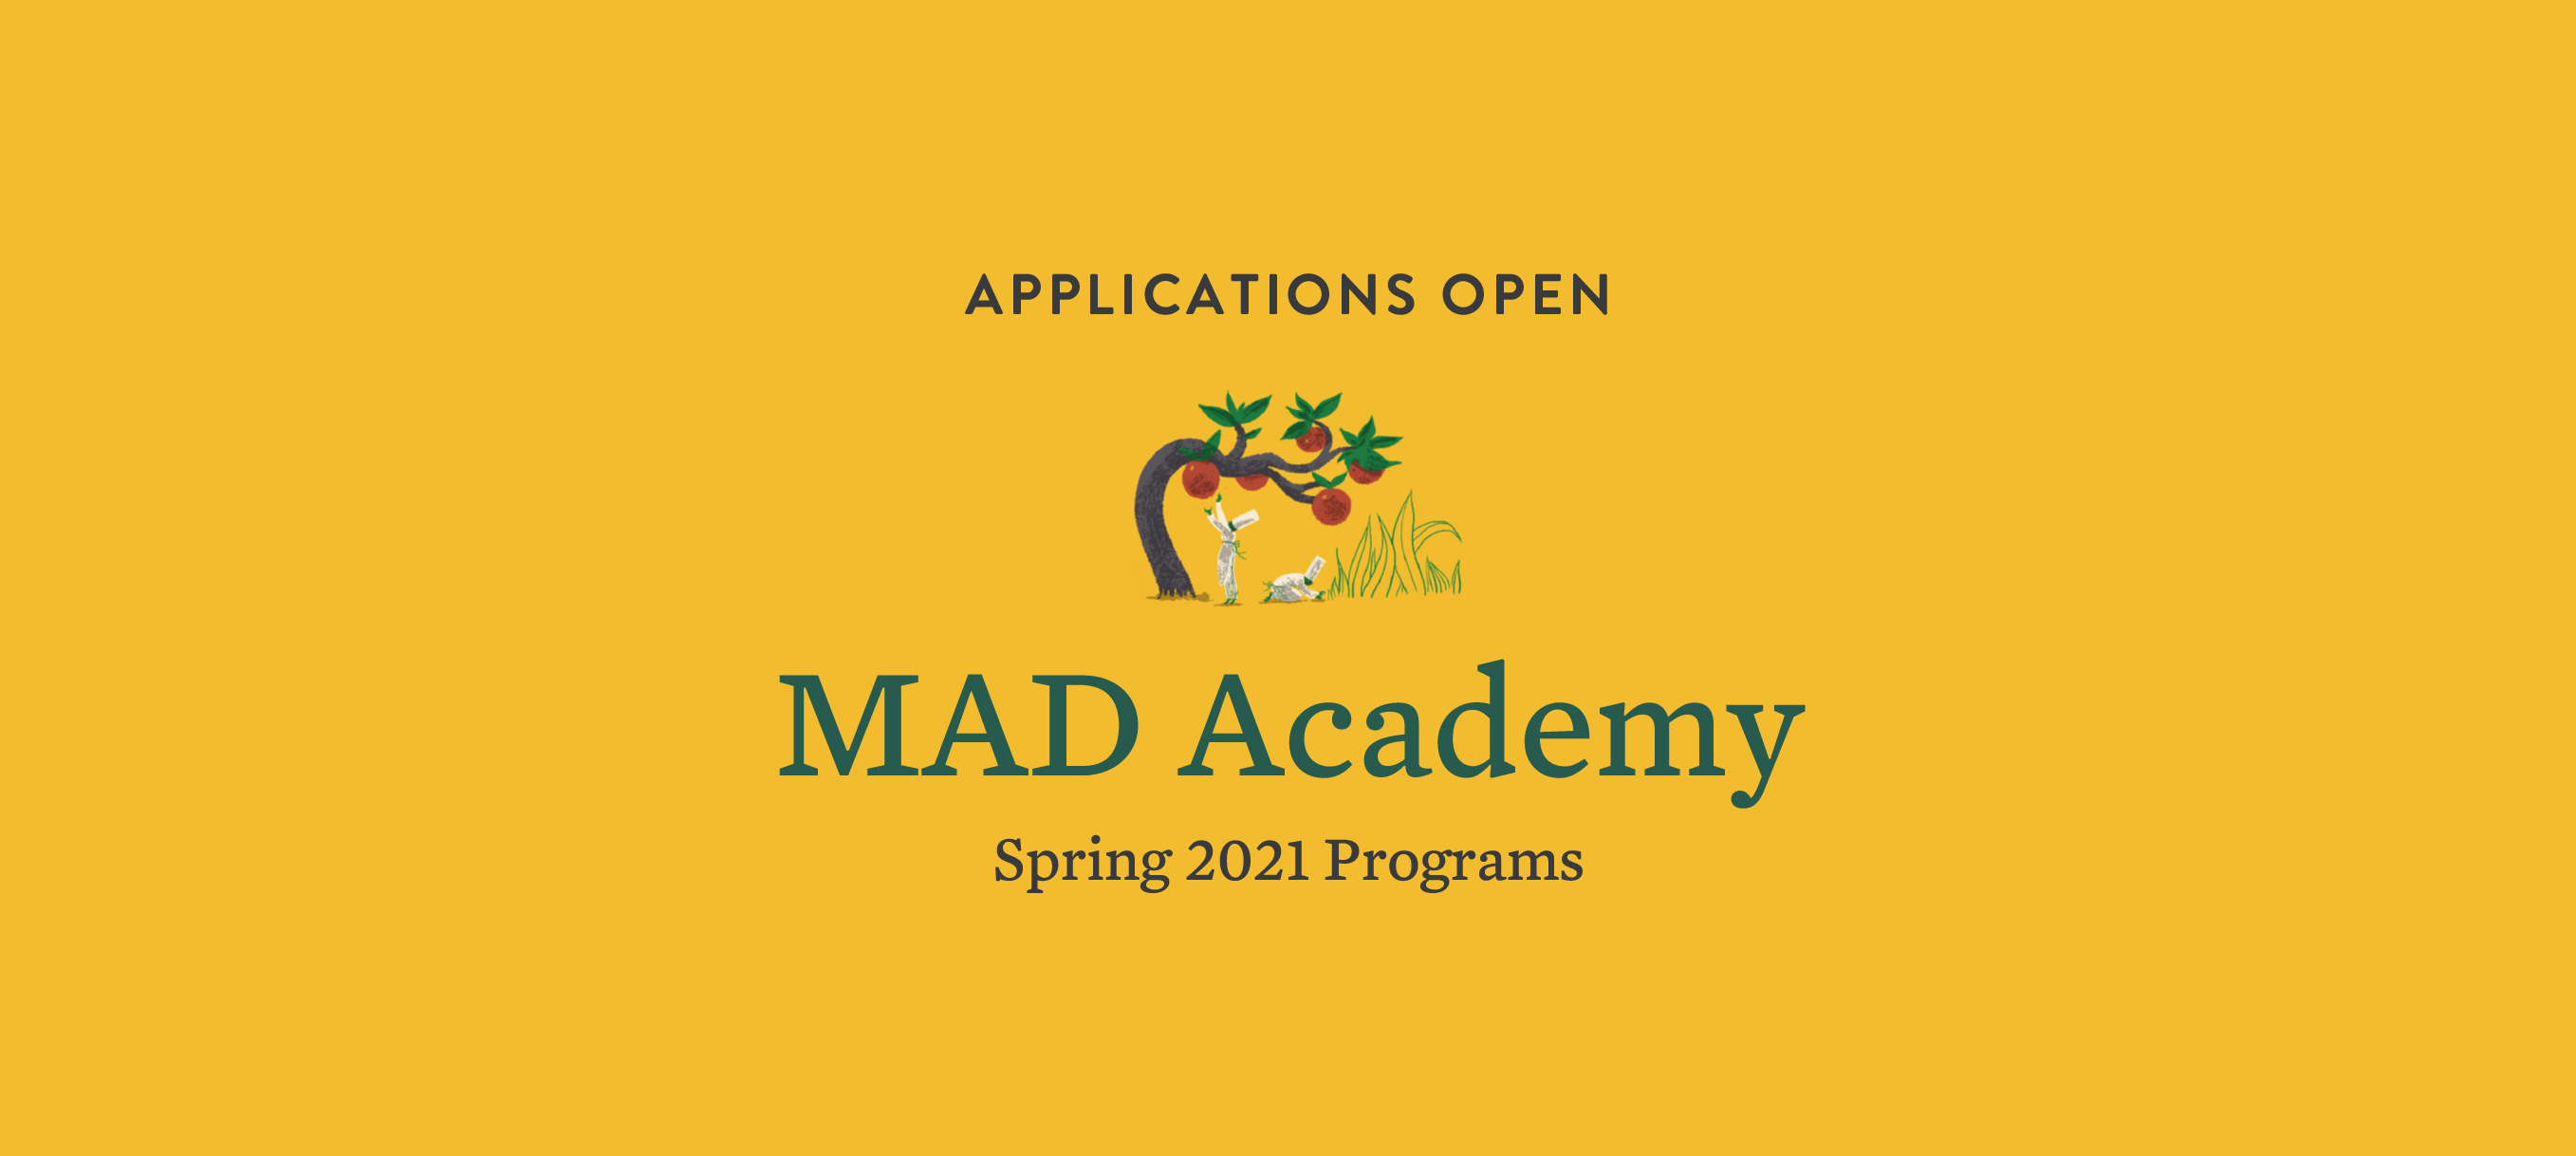 MAD Academy Applications Open